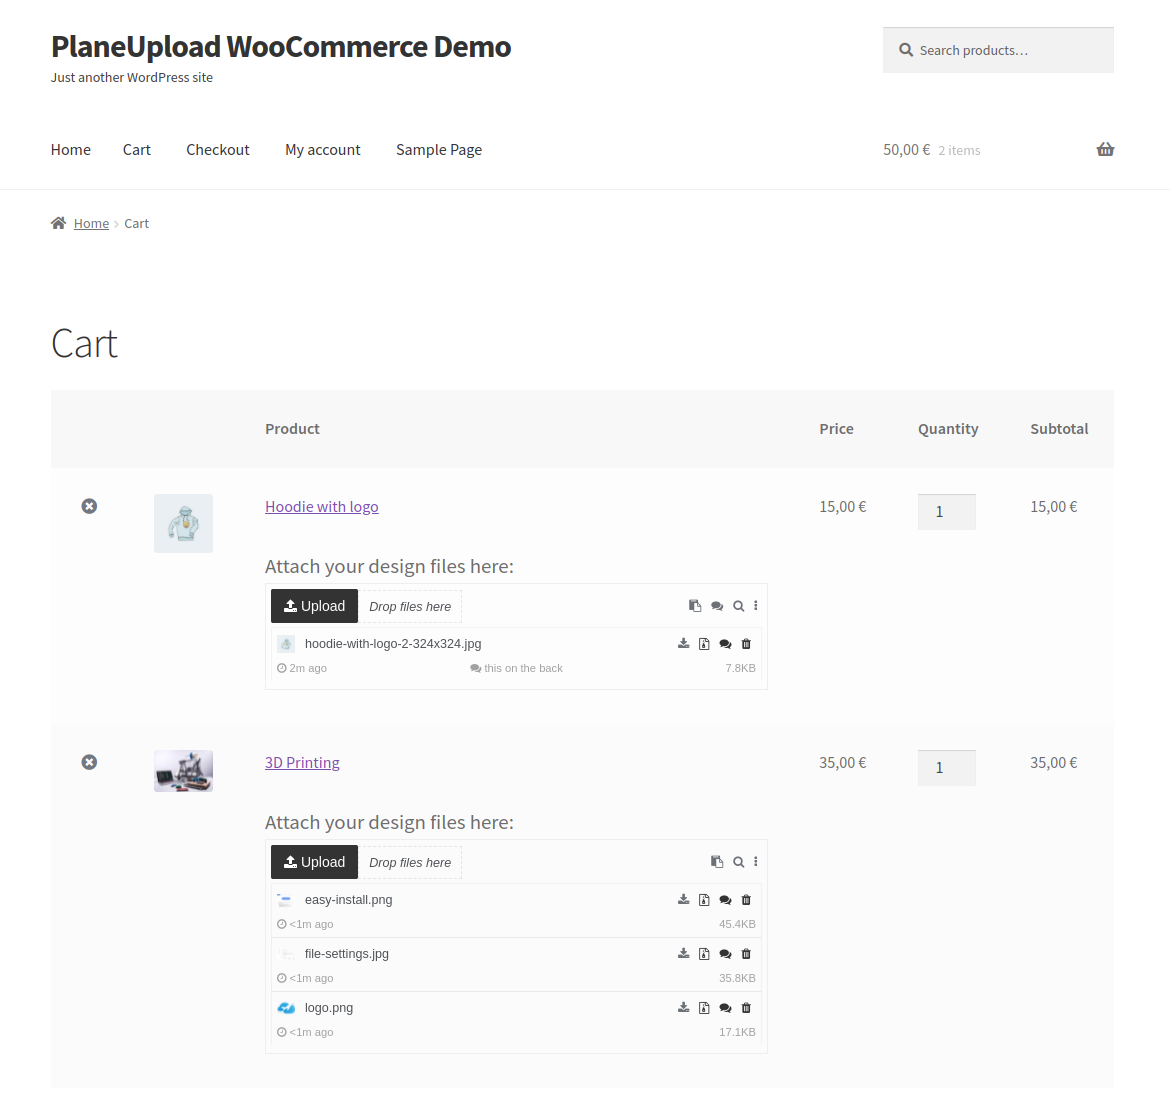 WooCommerce allow customer to upload files to the cart